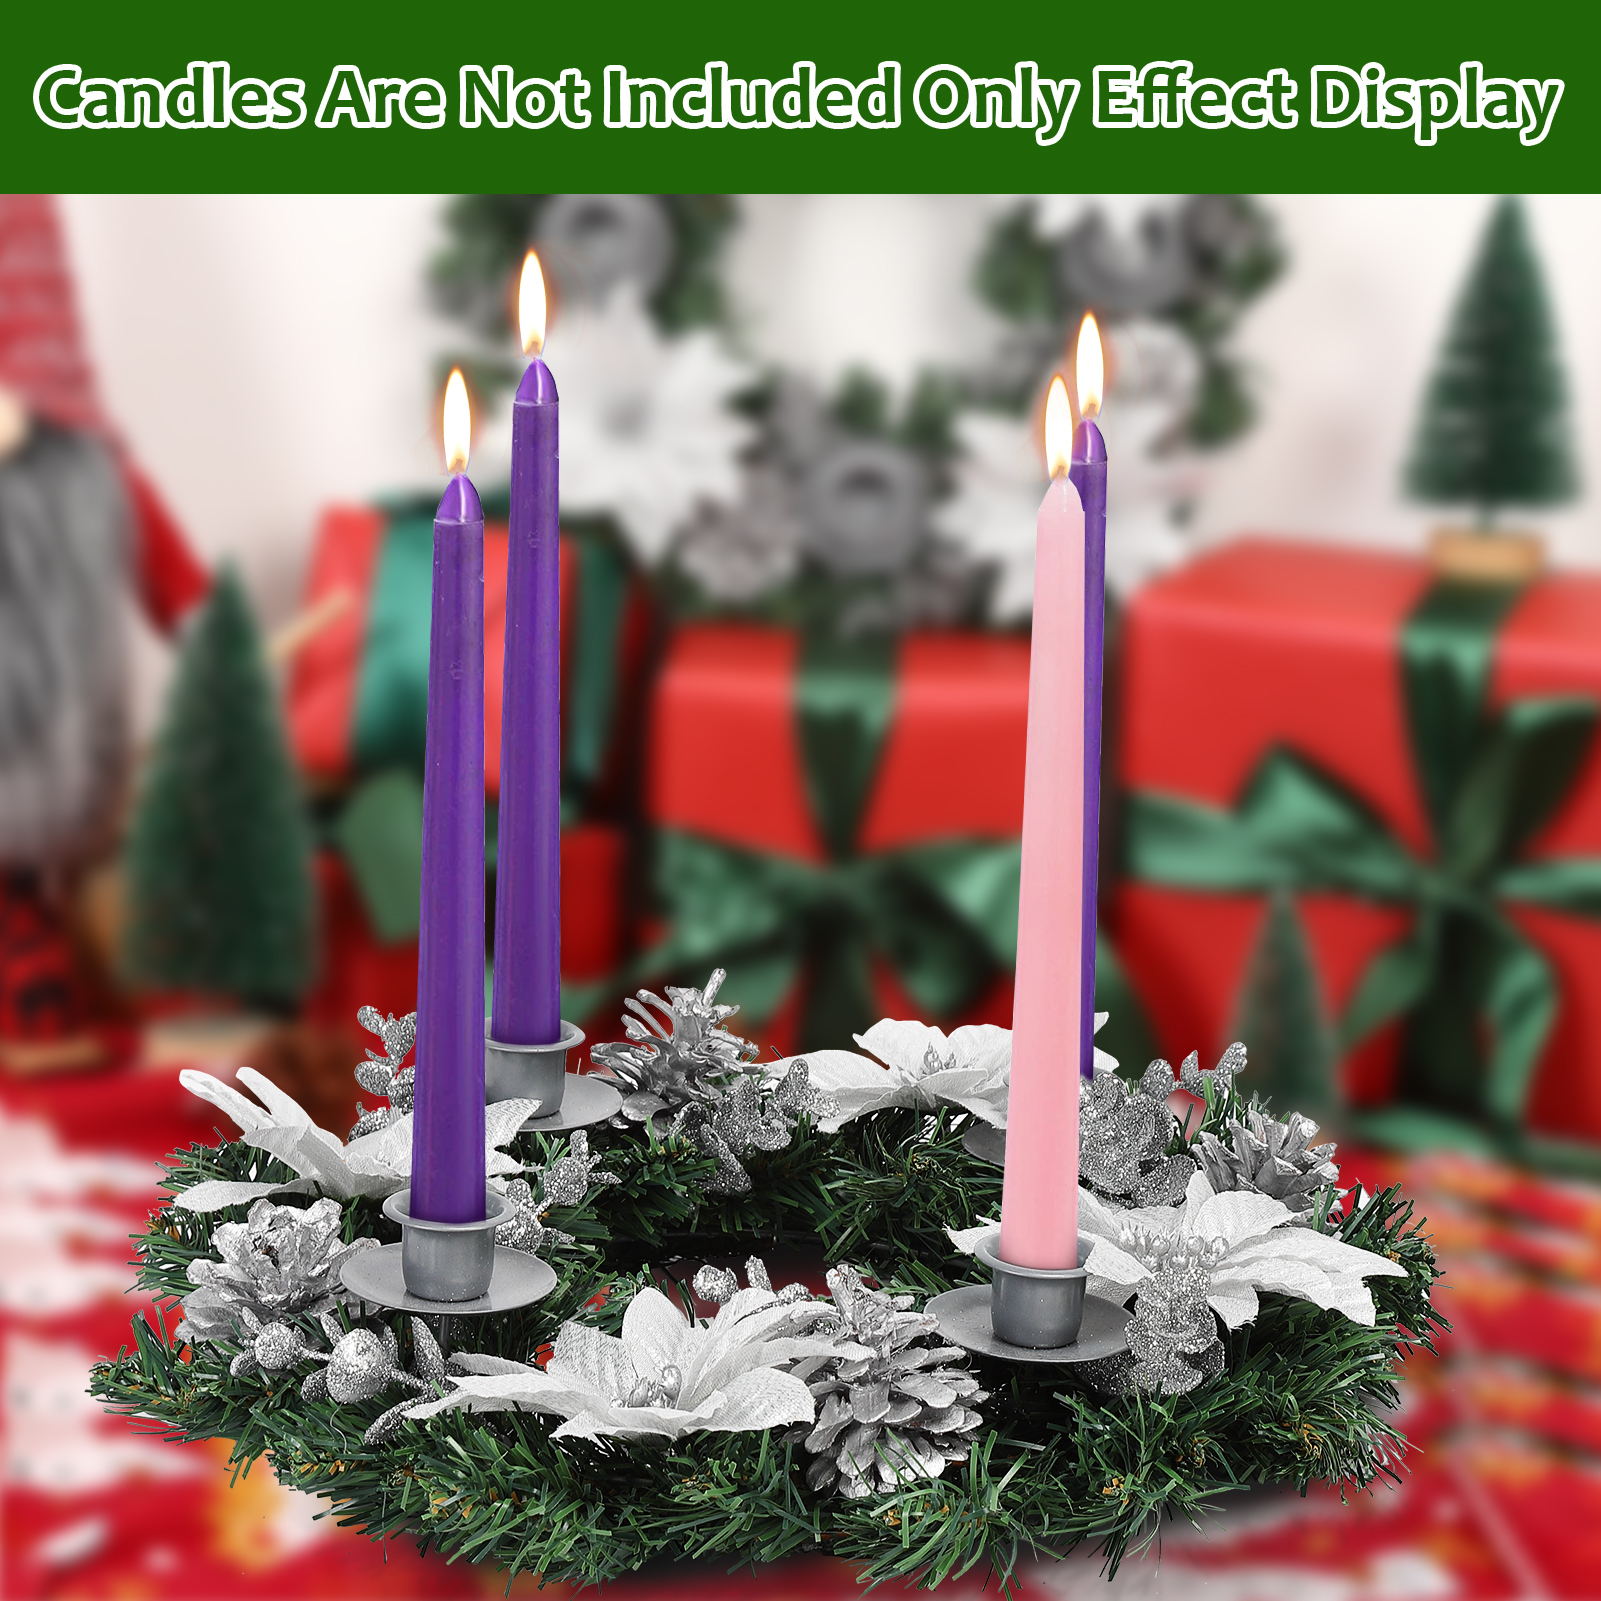 BUNDLE Advent Wreath and Soy Advent Candles – Be A Heart